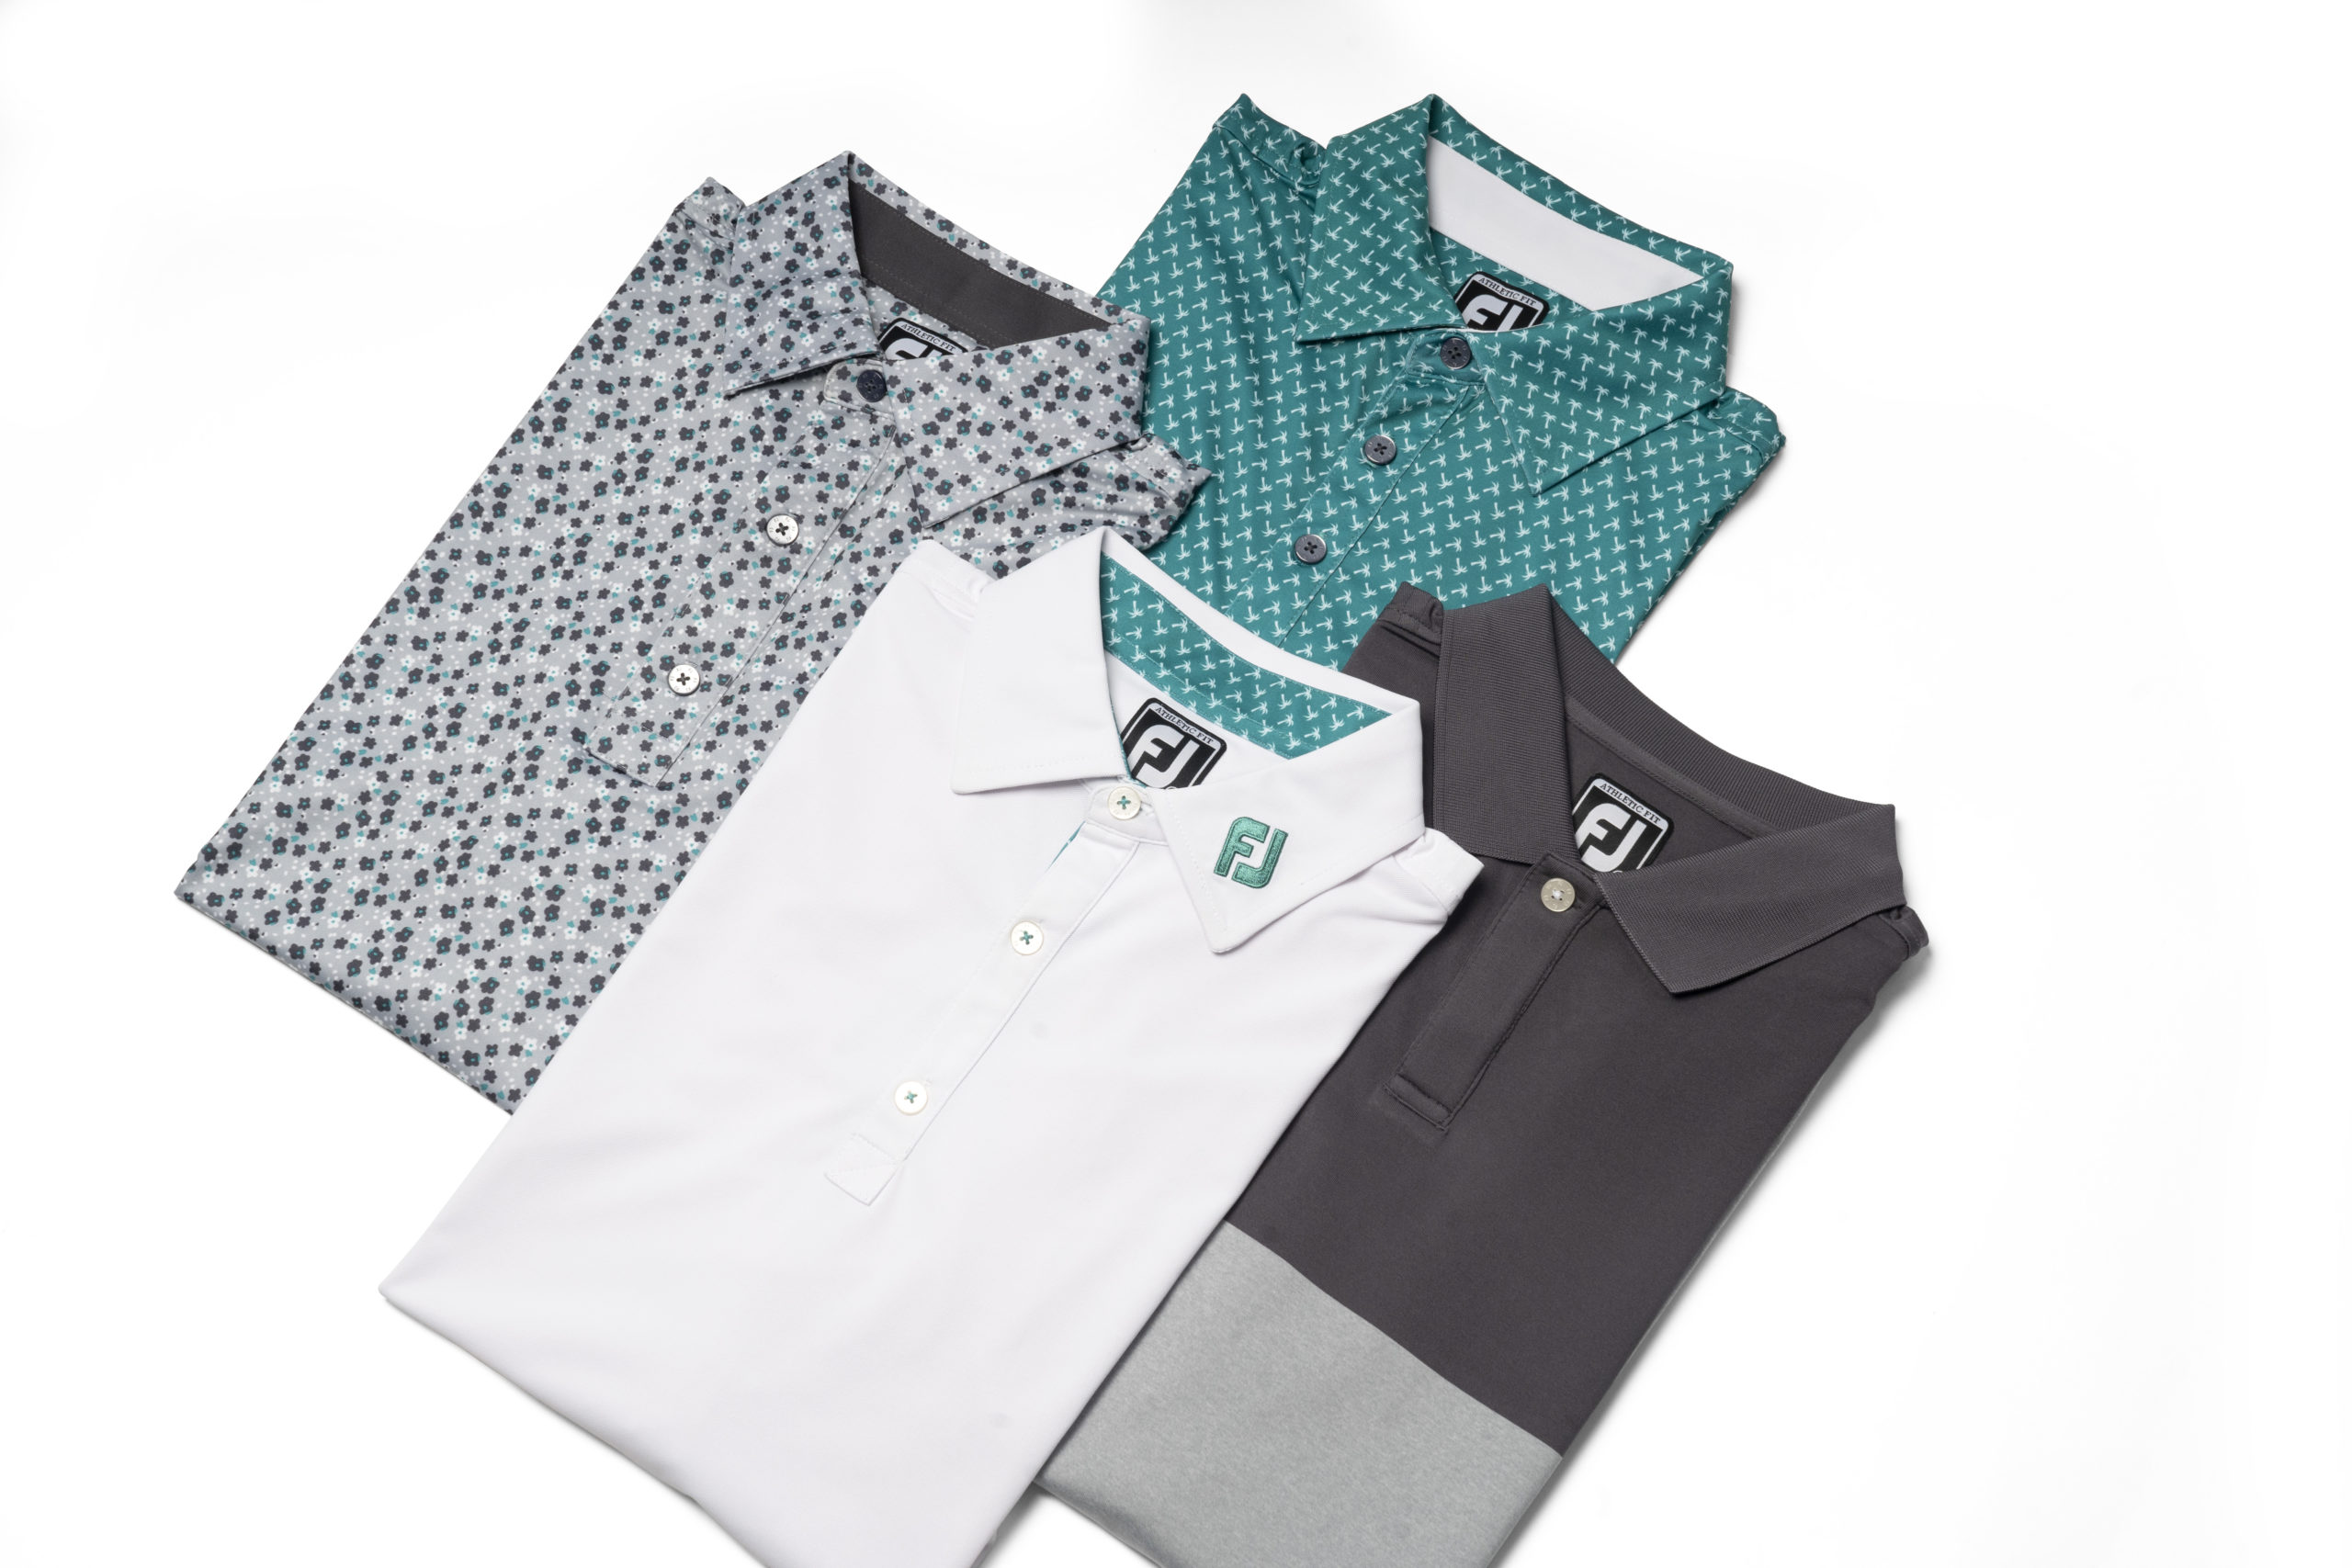 FJs-new-Emerald-Bay-Collection-featuring-Emerald-Charcoal-Heather-Grey-and-White-colours-for-a-striking-summer-style-on-the-course